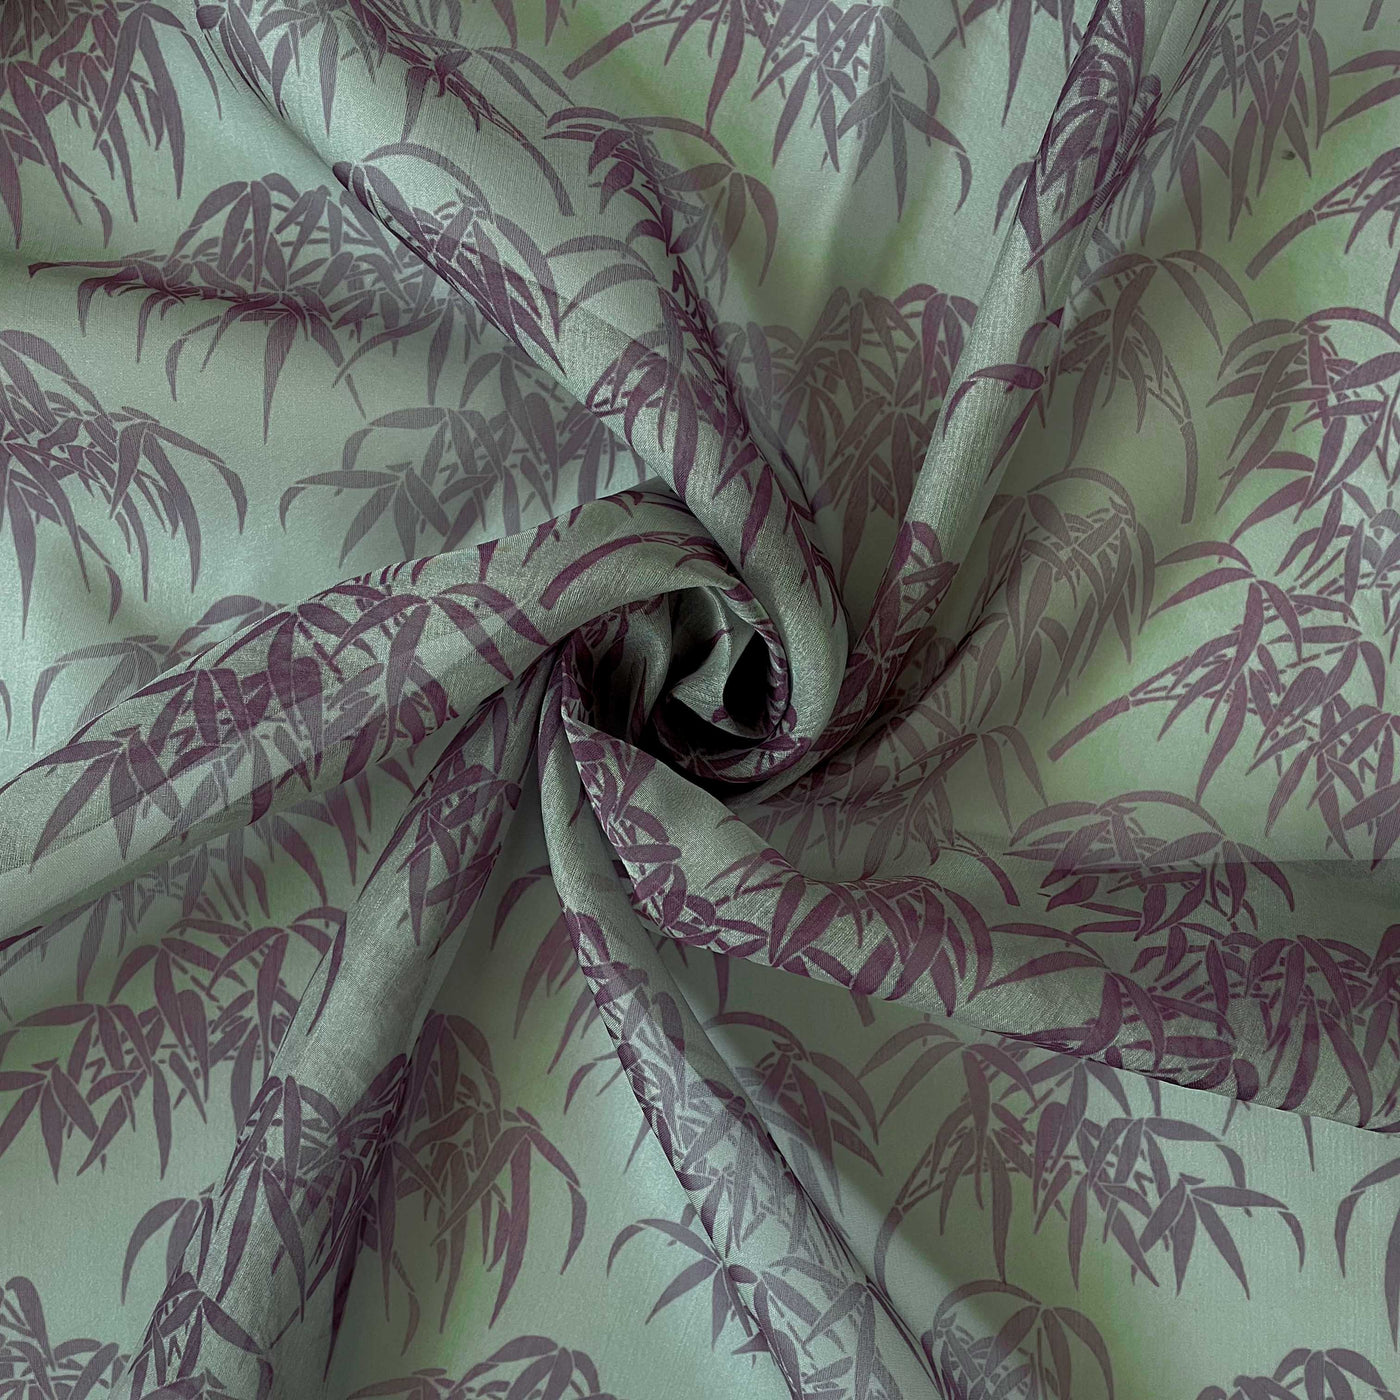 Digital Printed Organza Fabric Fabric Dusty Green & Magenta Abstract Leaves Printed Organza Fabric (Width 44 Inches)